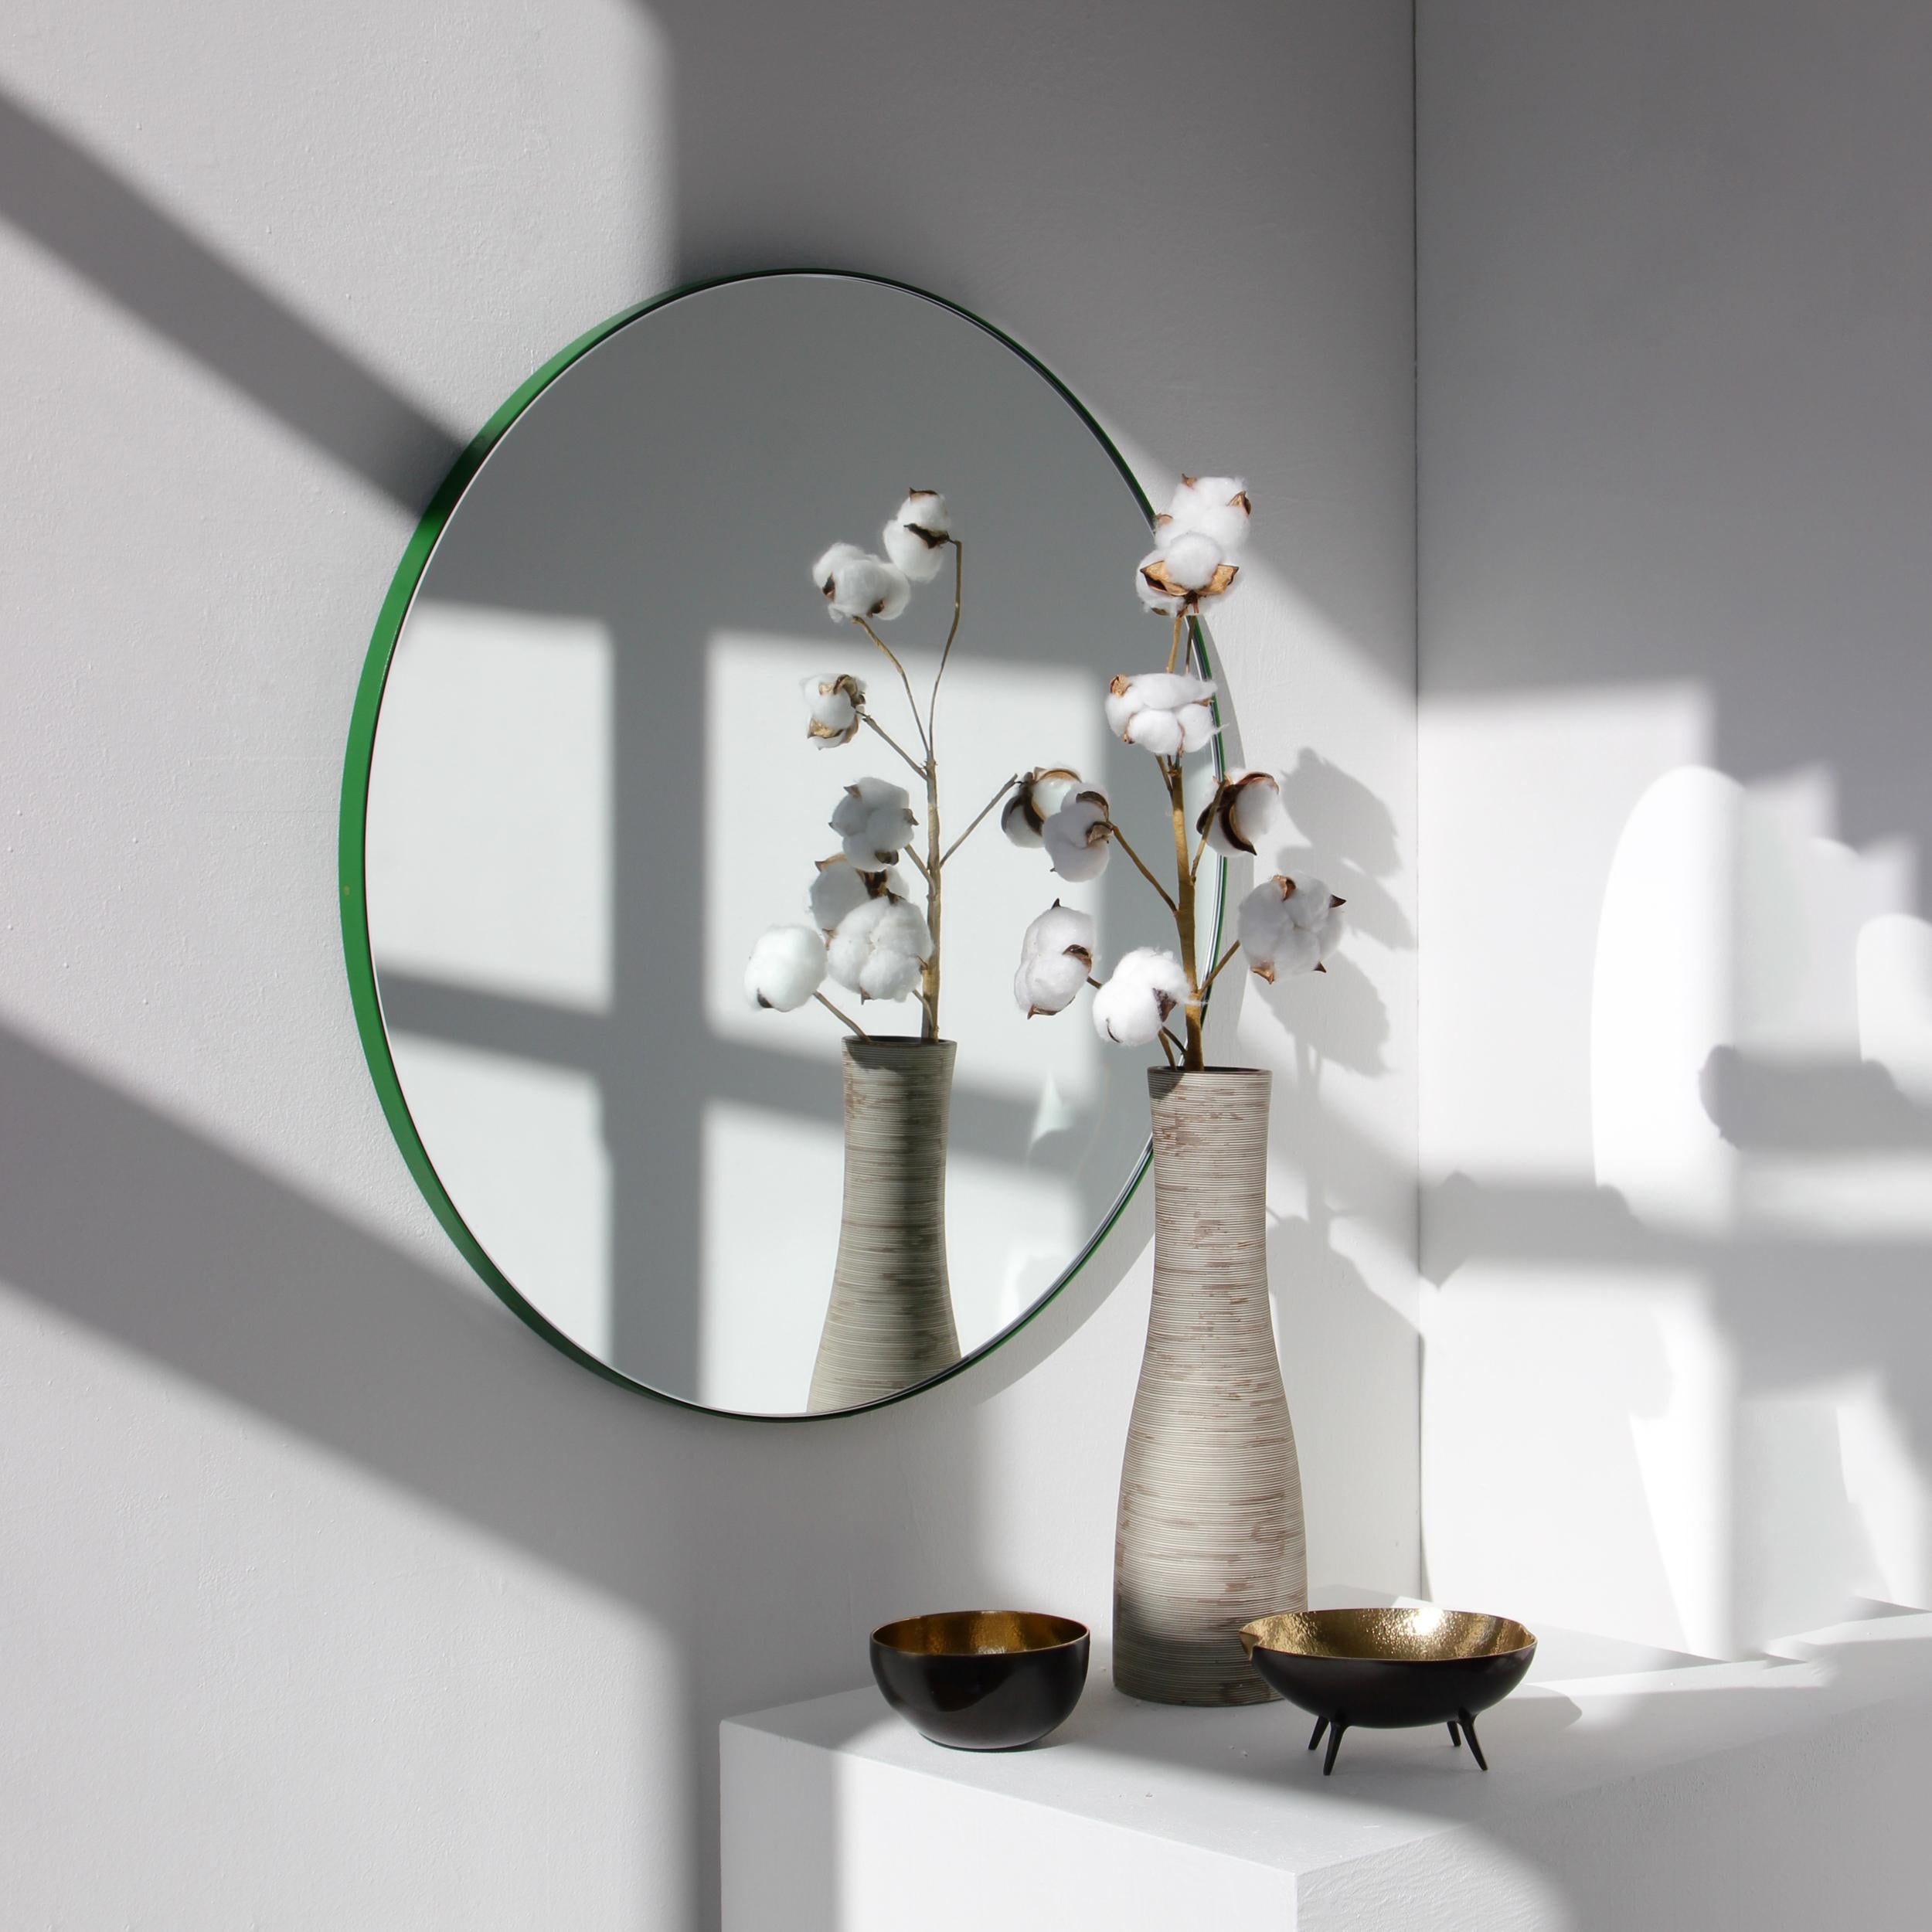 Minimalist round mirror with a lively aluminium powder coated green frame. Designed and handcrafted in London, UK.

Medium, large and extra-large mirrors (60, 80 and 100cm) are fitted with an ingenious French cleat (split batten) system so they may